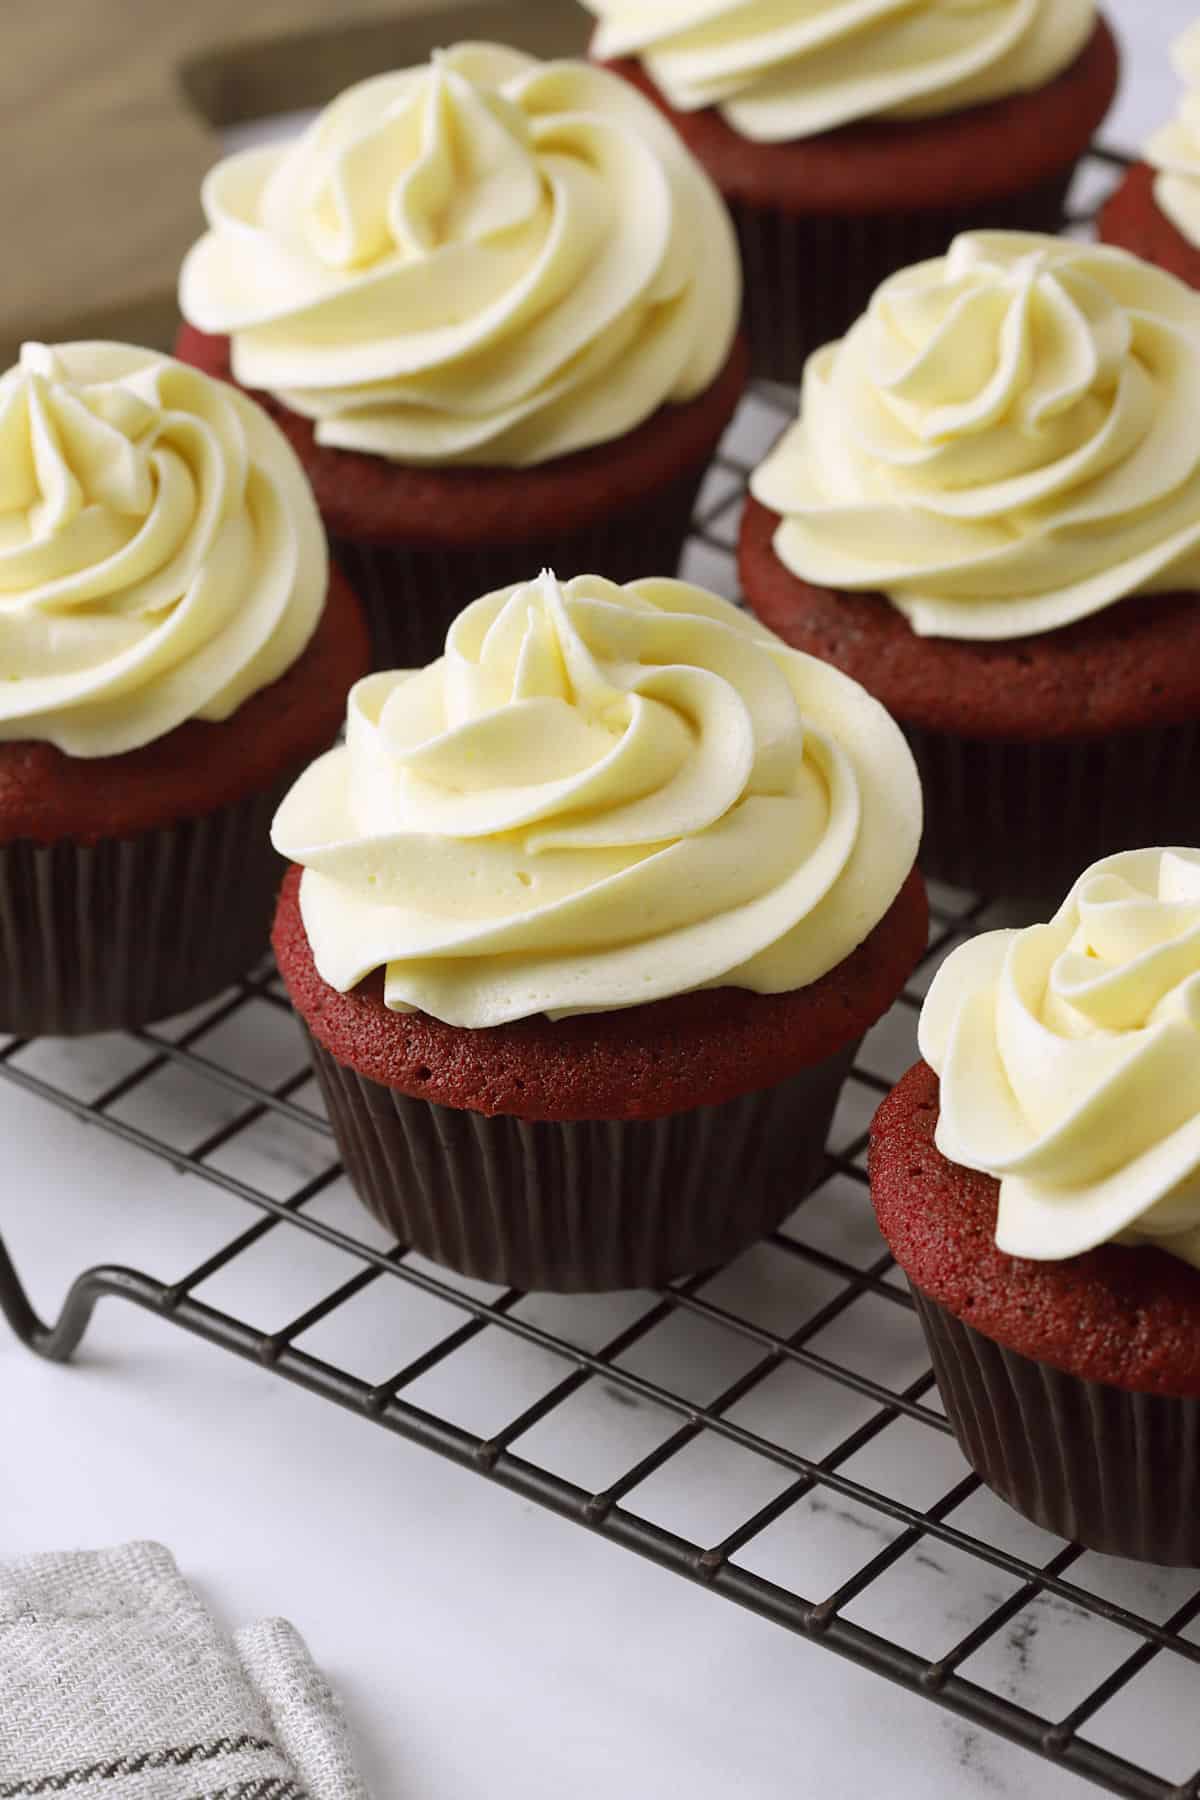 Rows of red velvet cupcakes topped with piped ermine frosting.